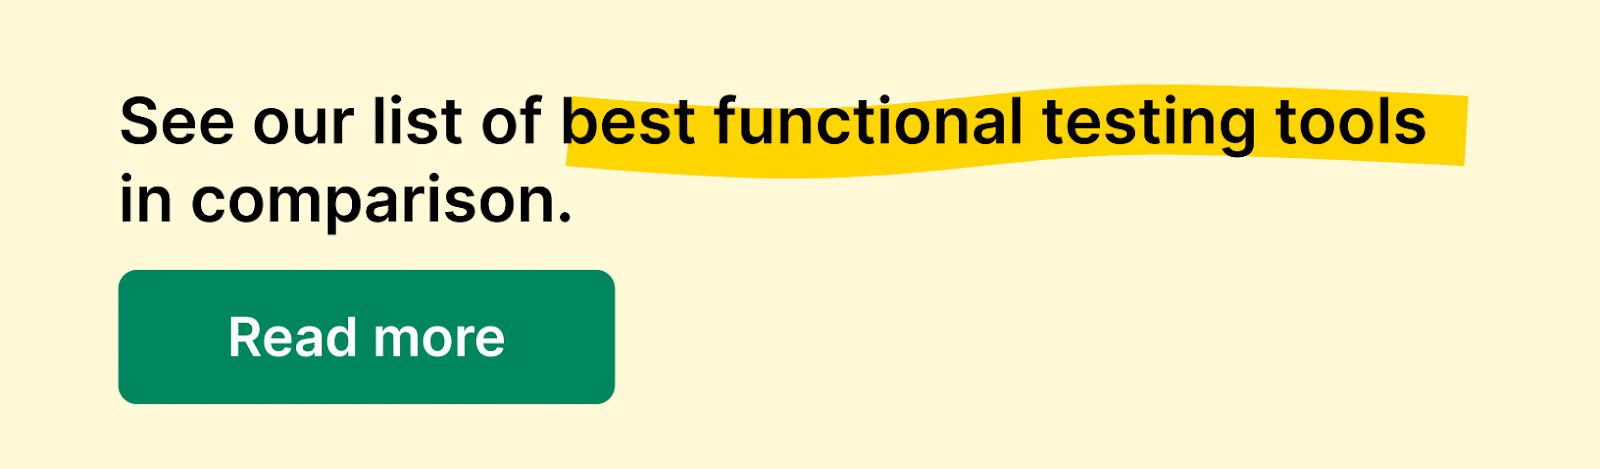 Compare best functional testing tools | Katalon